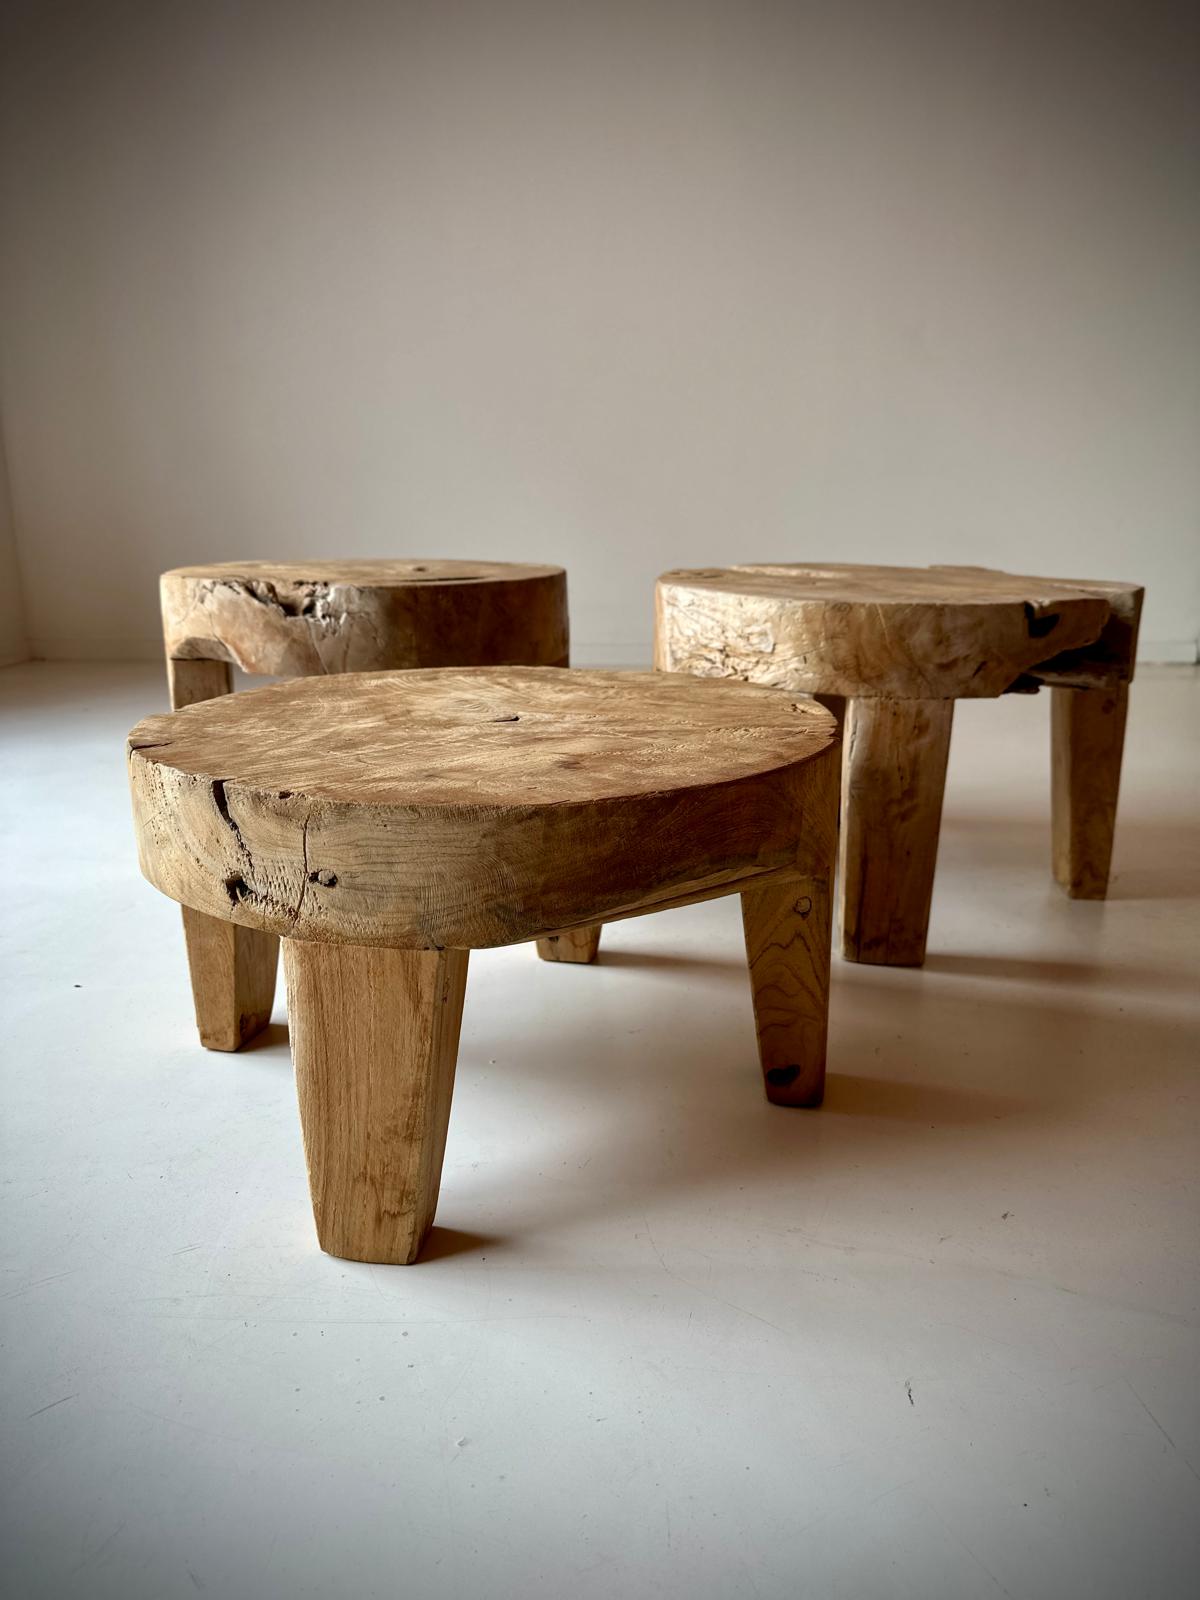 coffeetables, stools and side tables